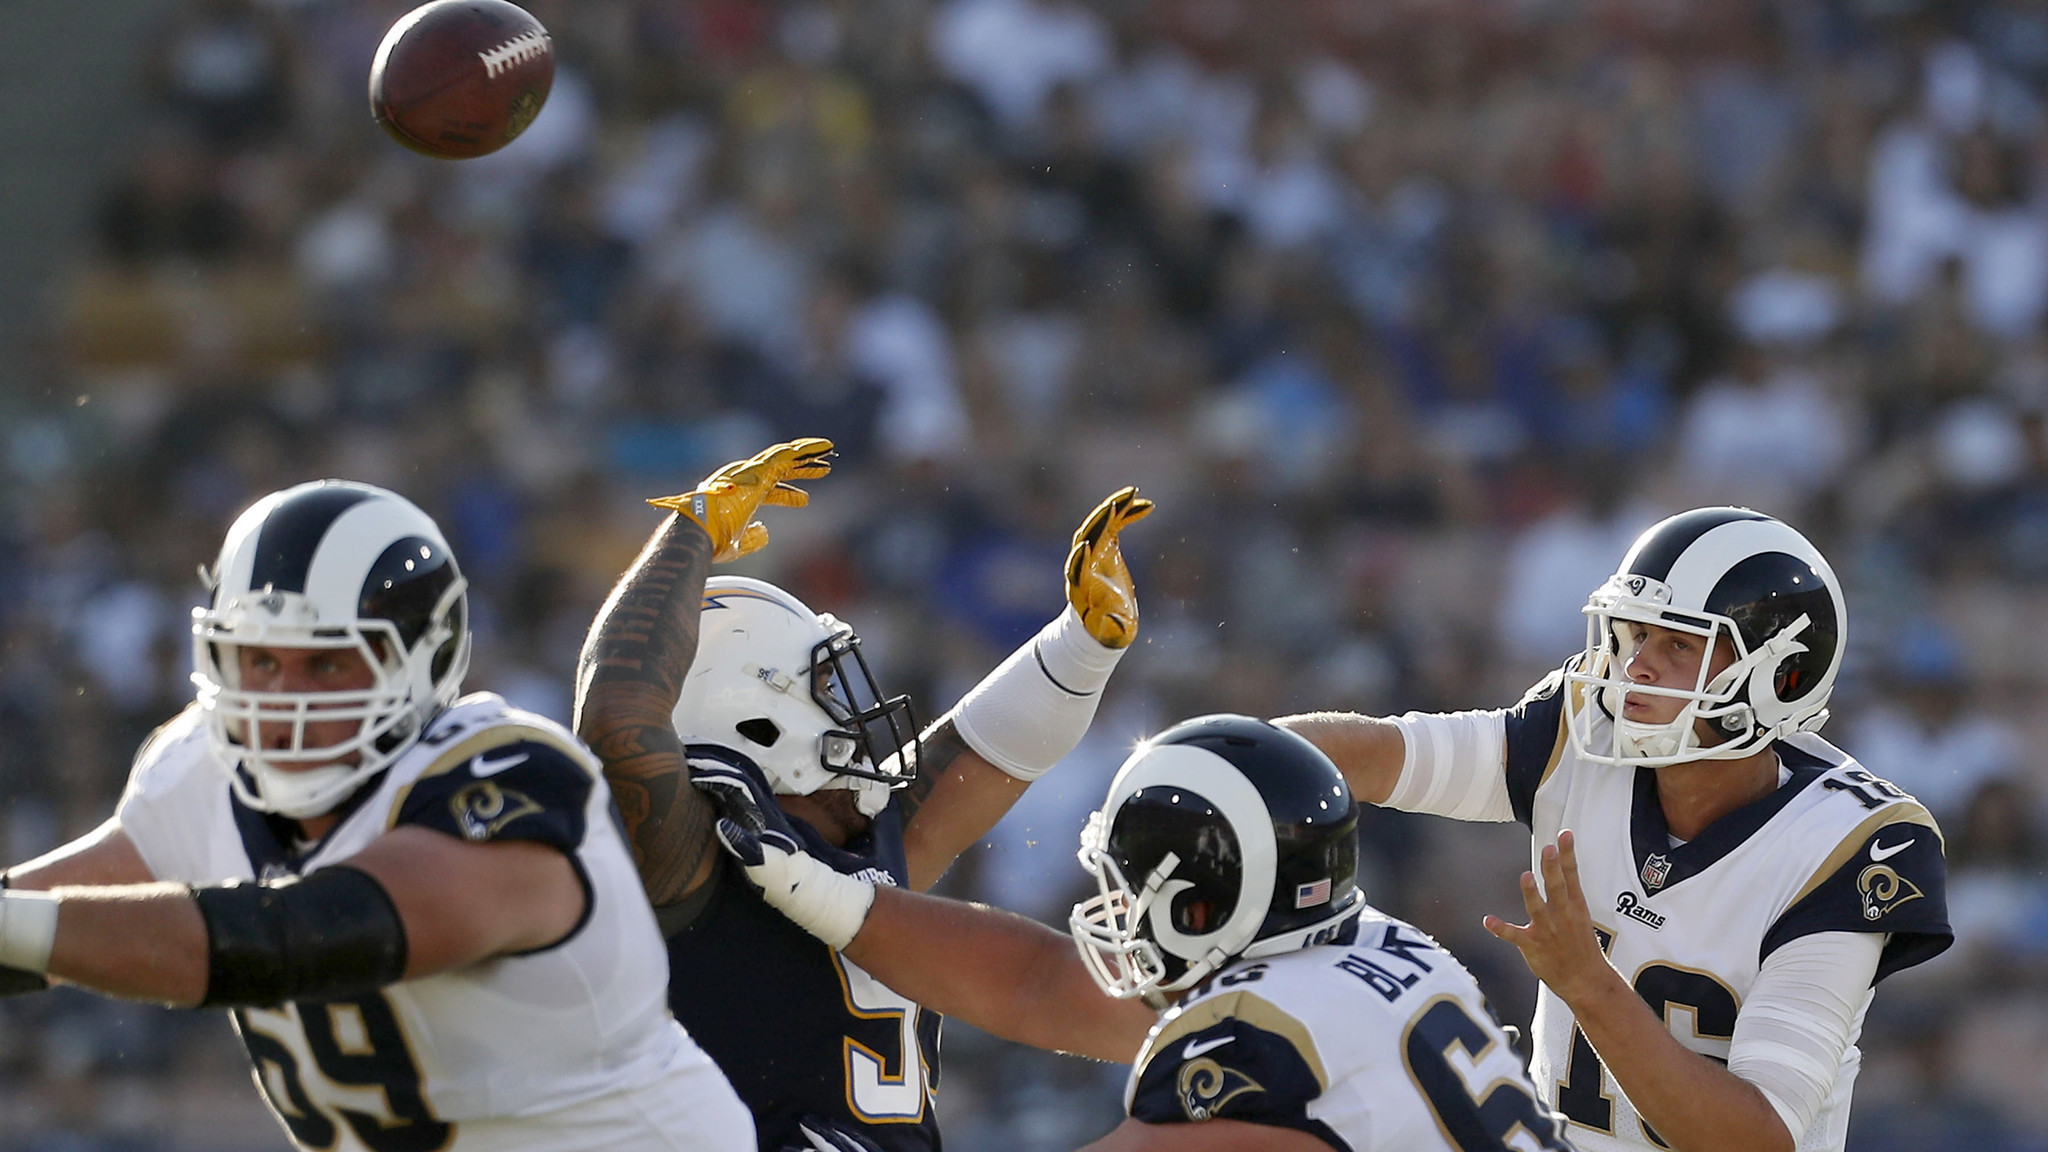 Jared Goff has two turnovers in Rams exhibition loss to the Chargers – LA Times